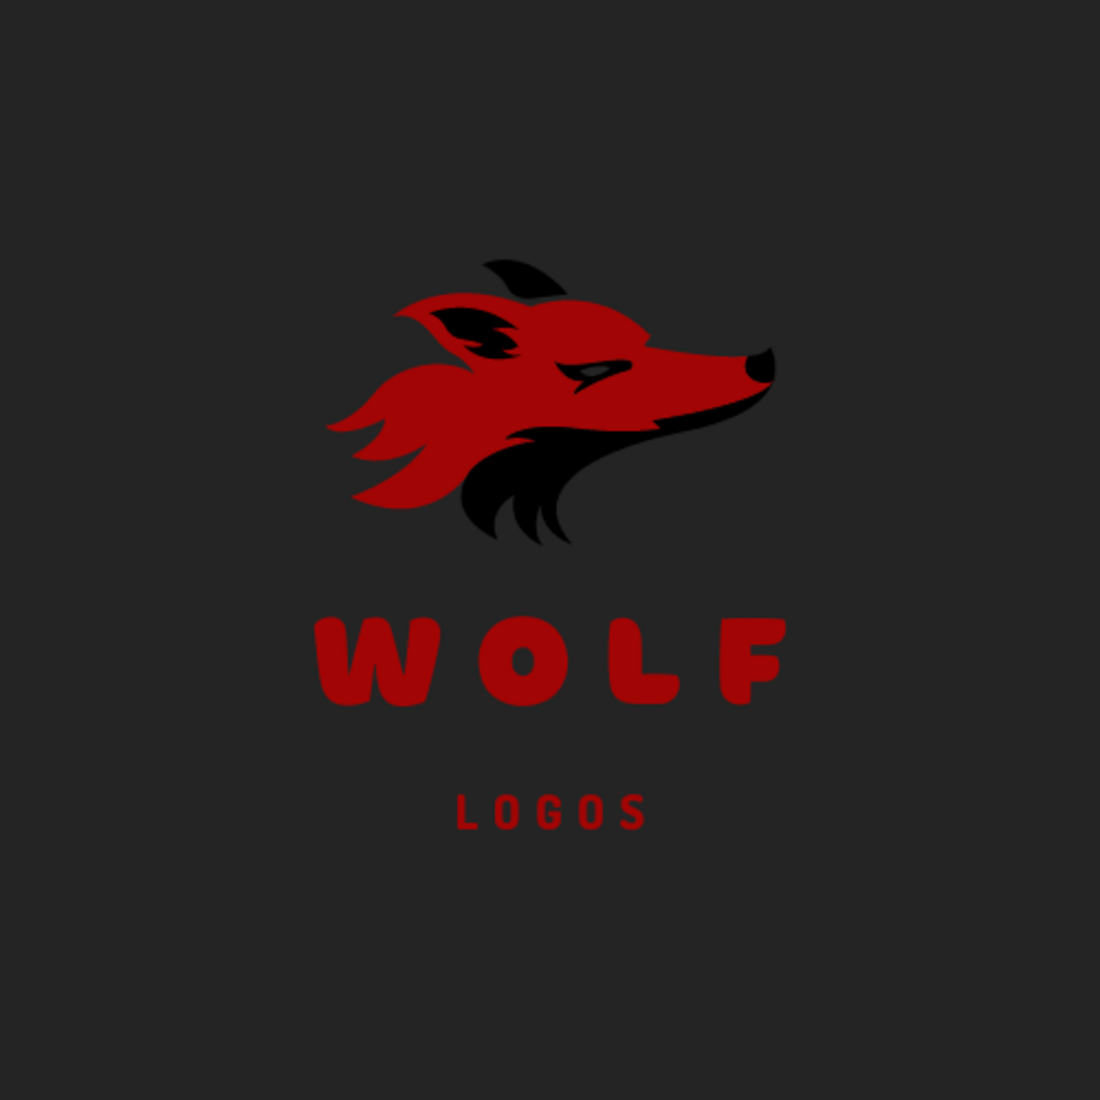 Cool Wolf logo in 3 colors : Red, Blue, Green and the text can be edited later to write what you want cover image.